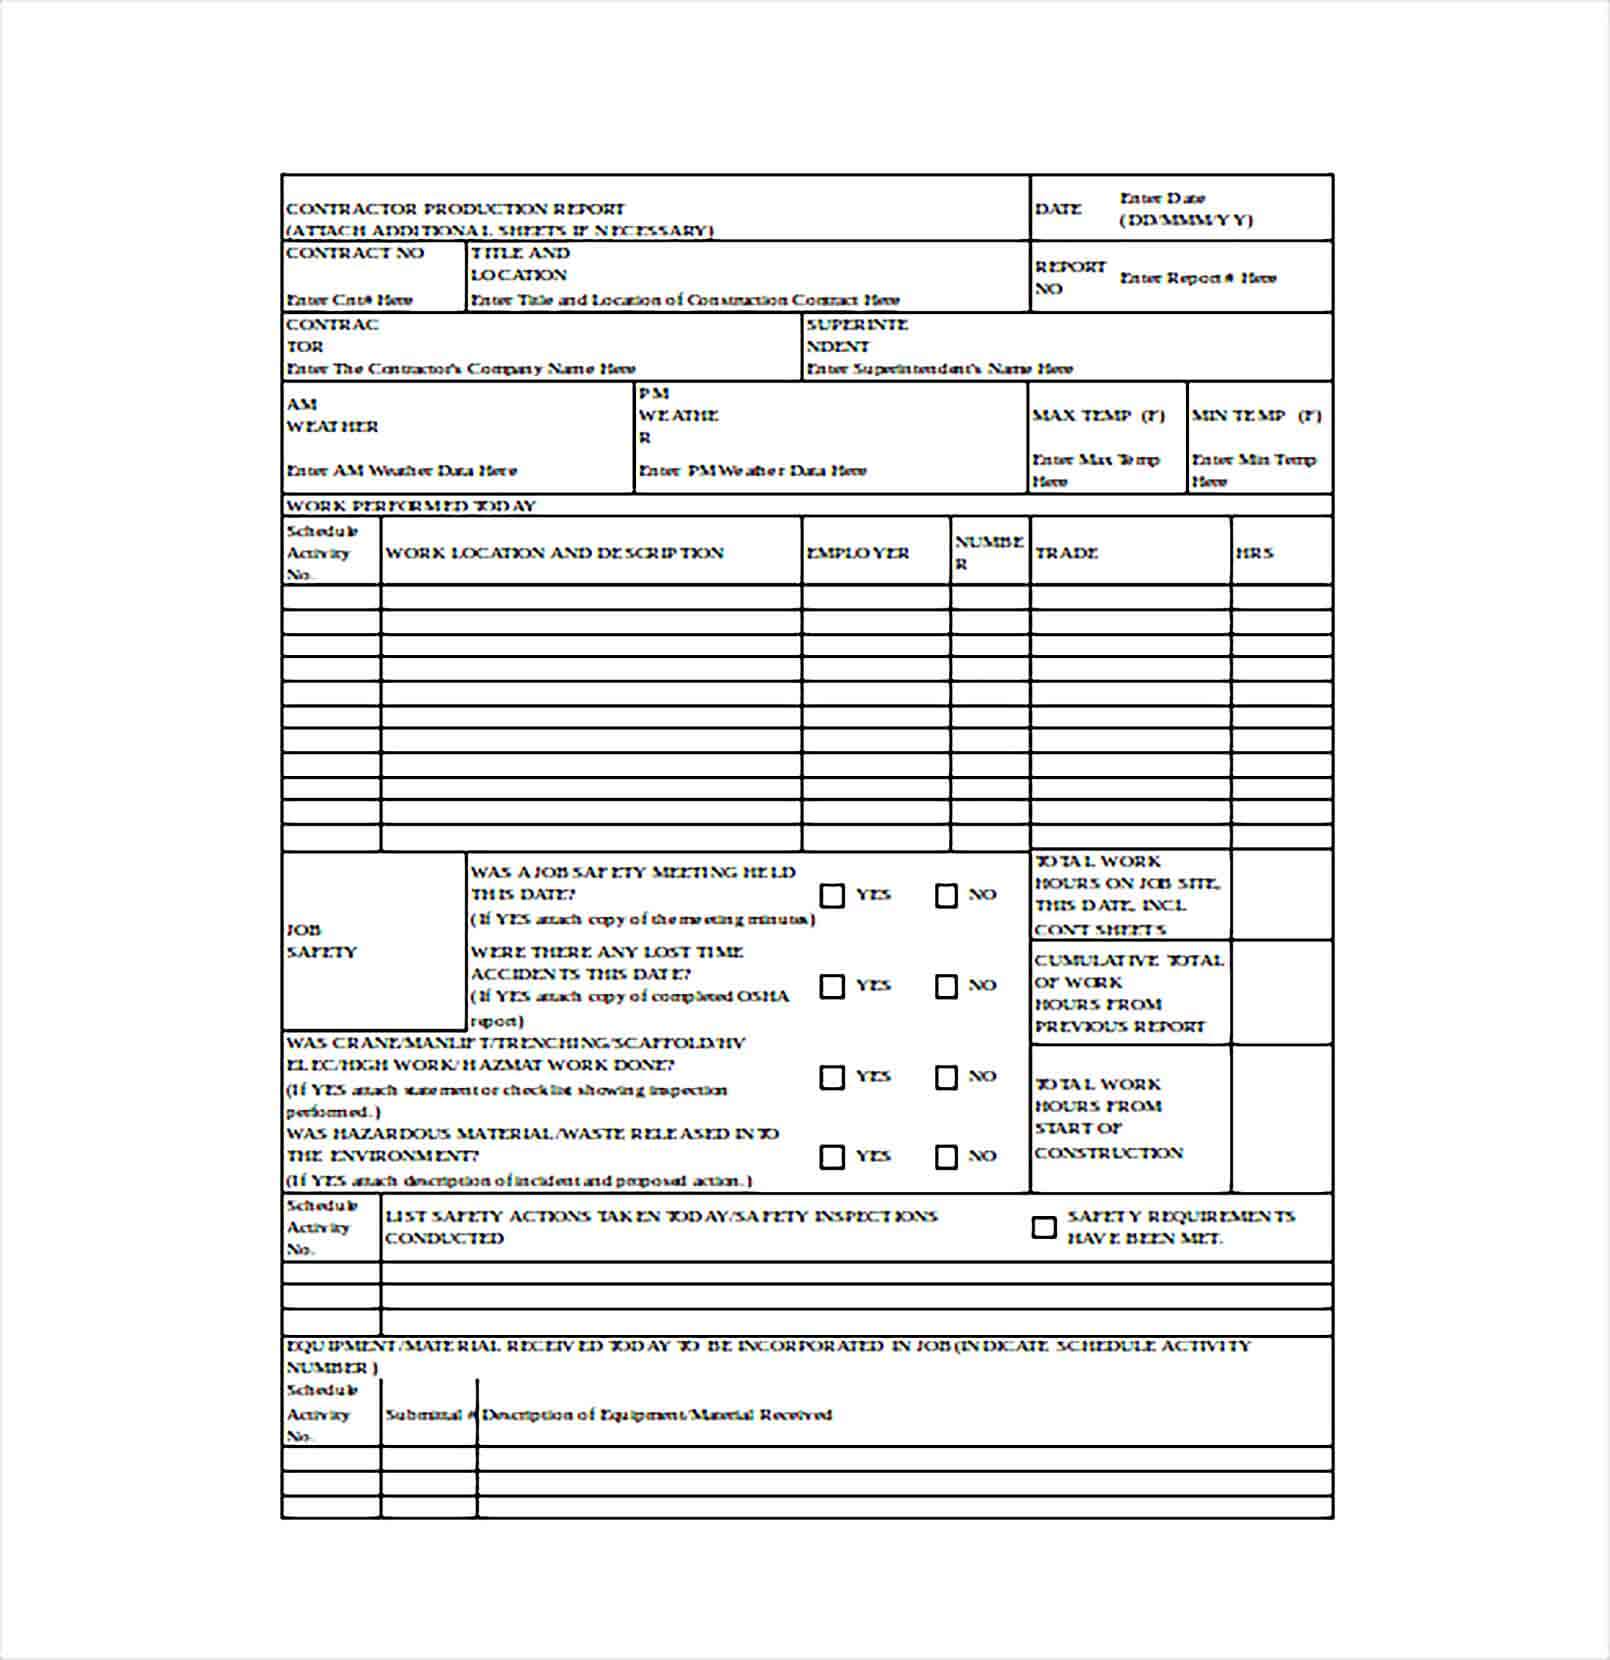 Sample Contractor Production Report Word Template